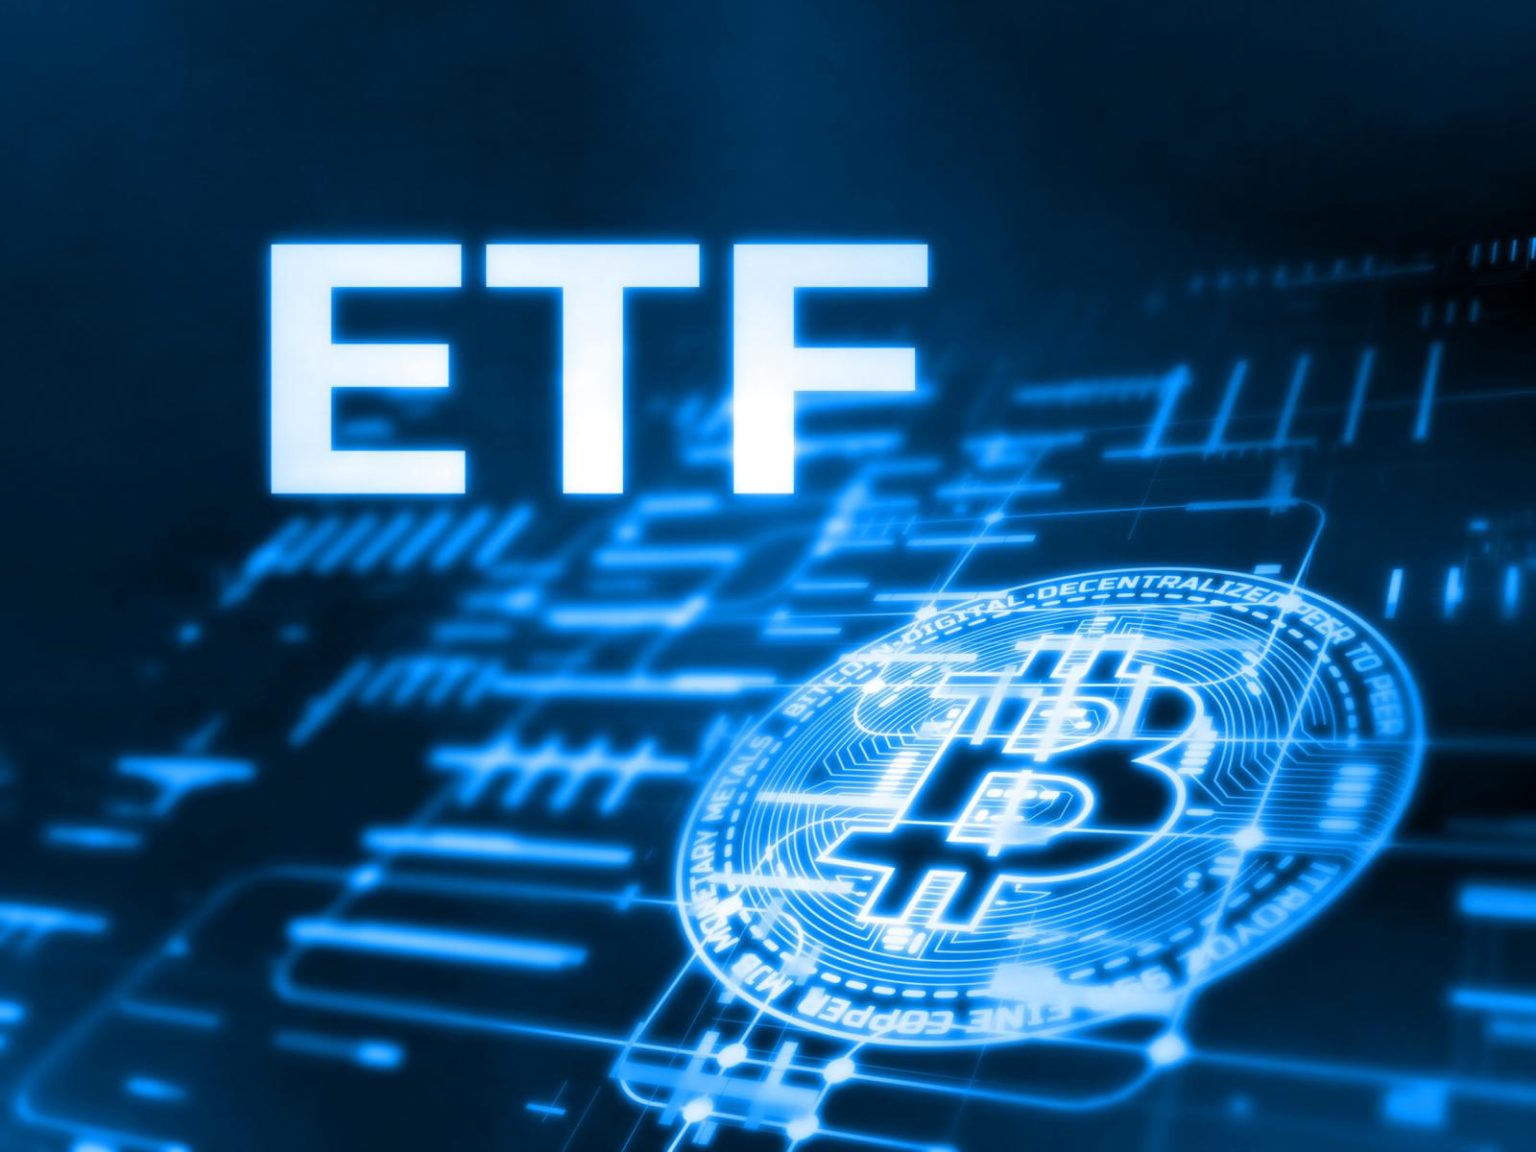 Spot Bitcoin Etfs Soar 10 Billion In Just 3 Days Could They Propel Btc Price To 50000